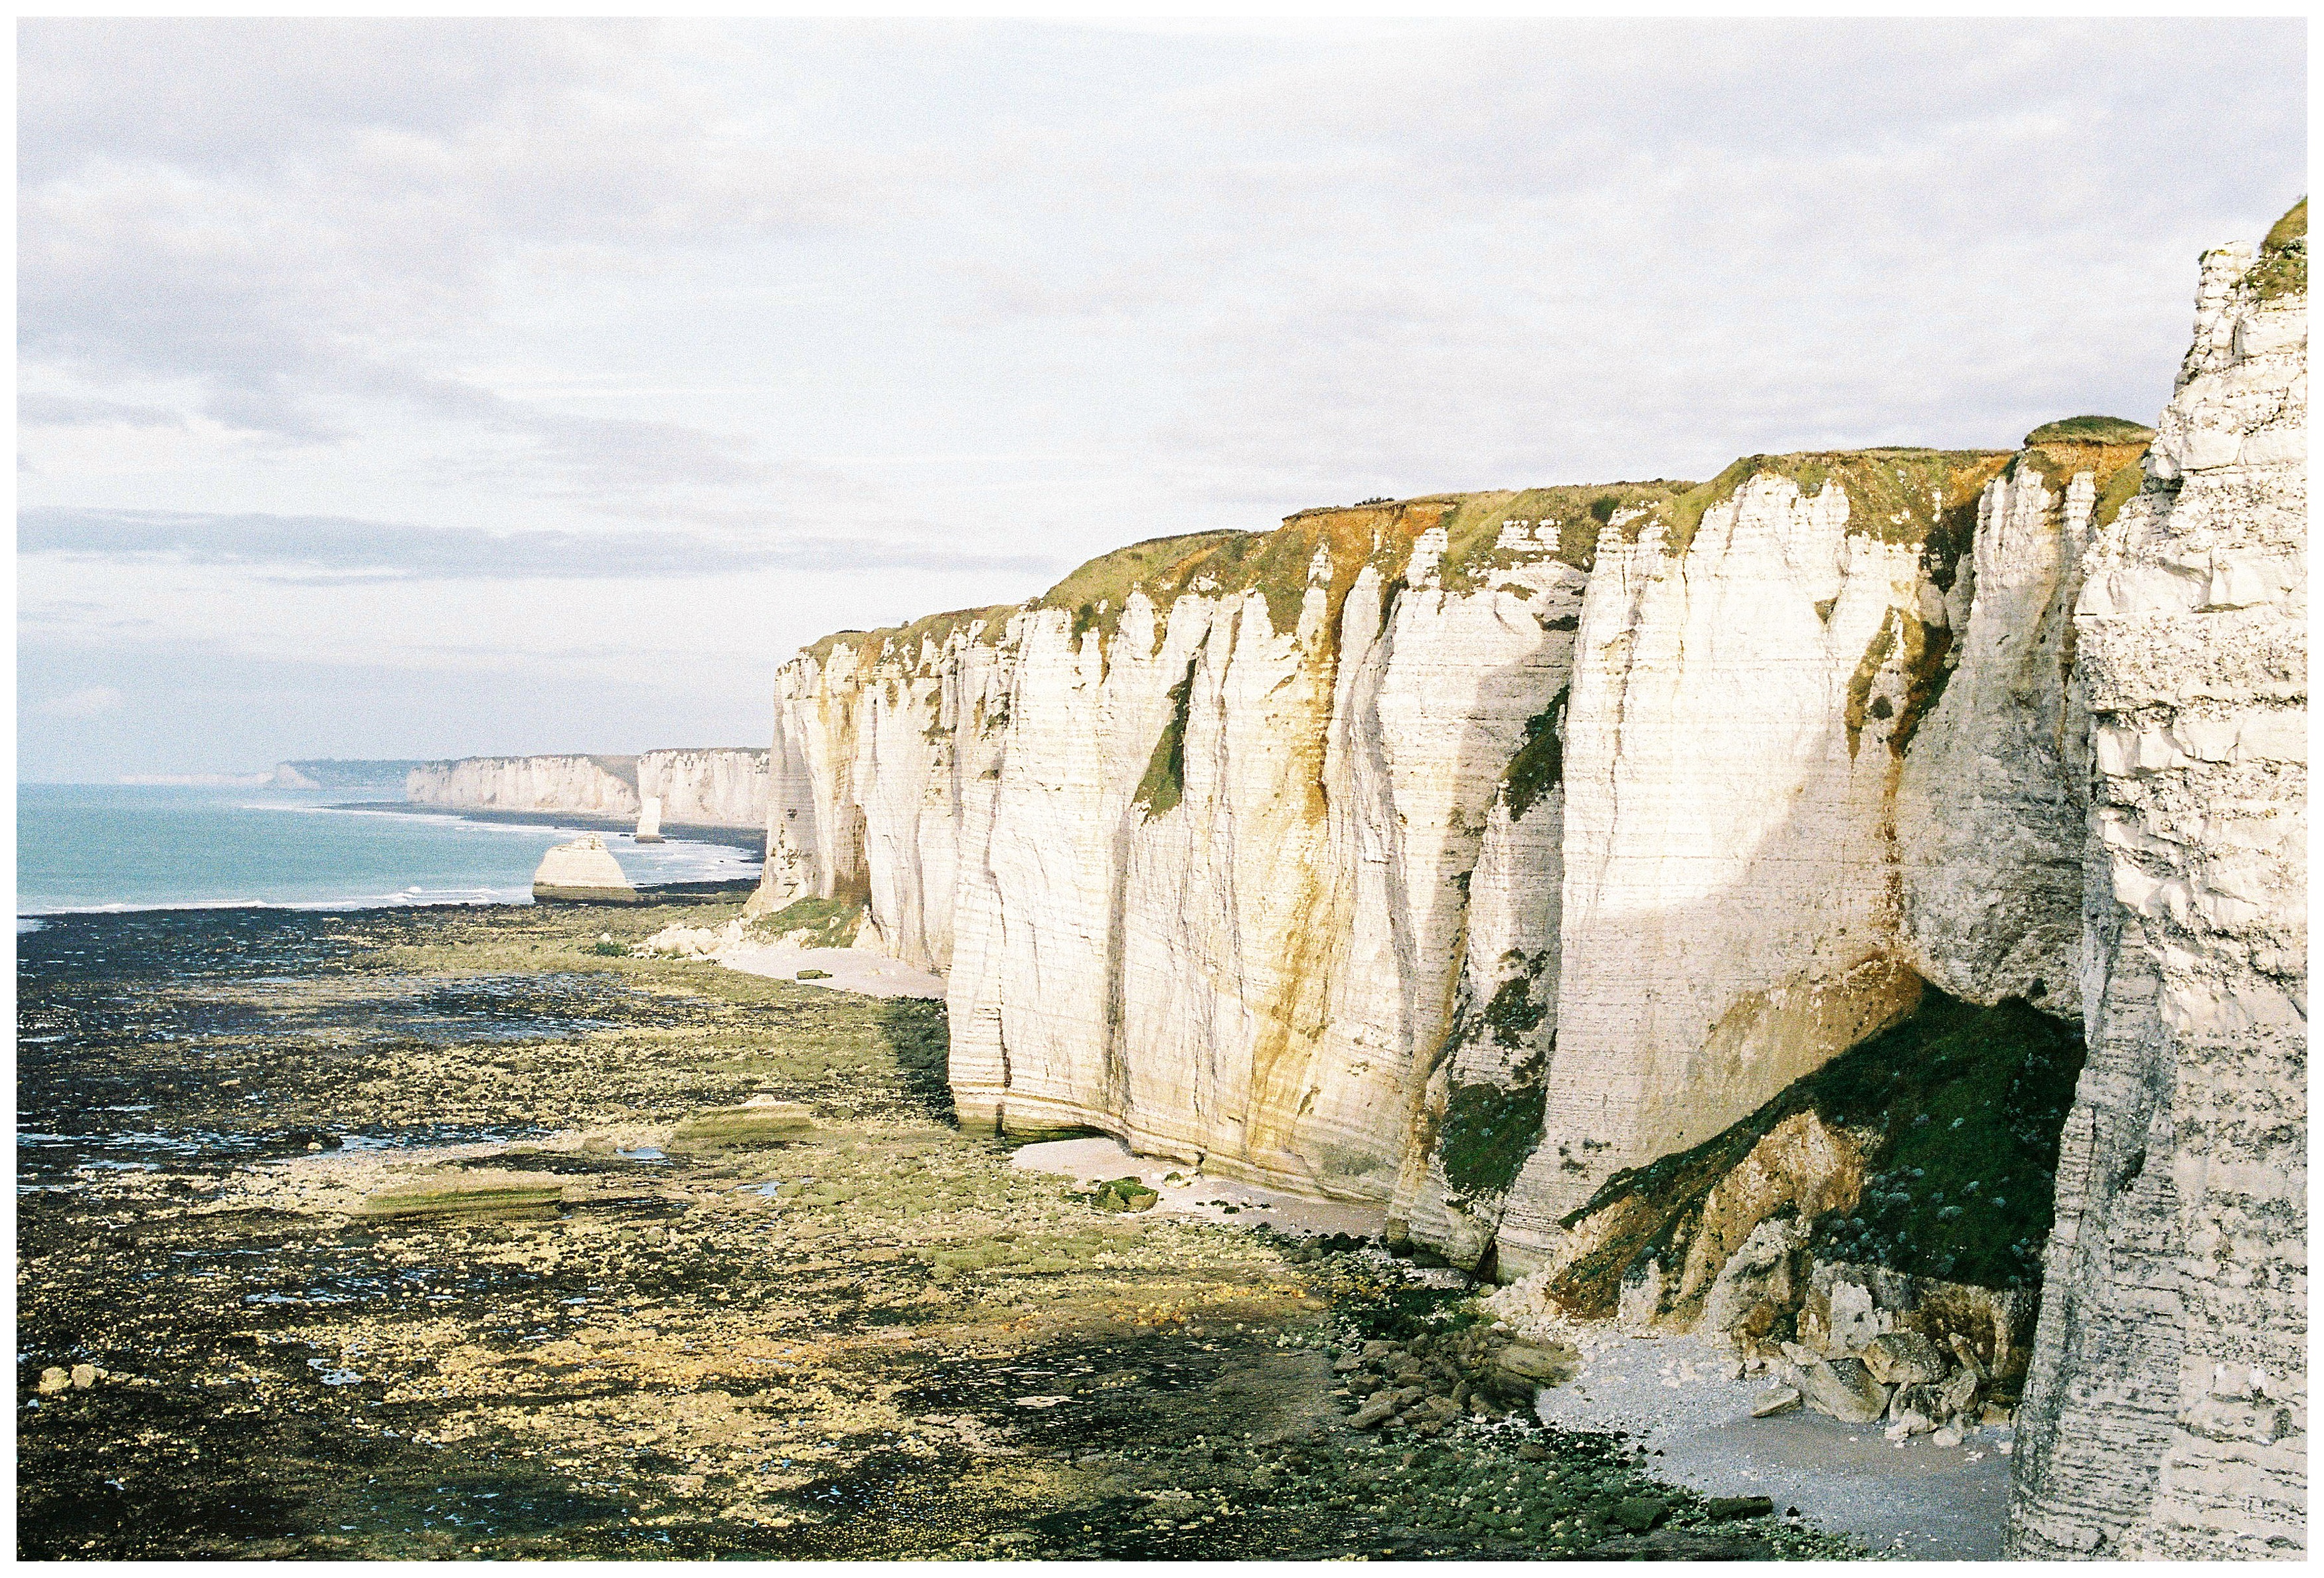 the white cliffs of etretat normandy by le havre, france